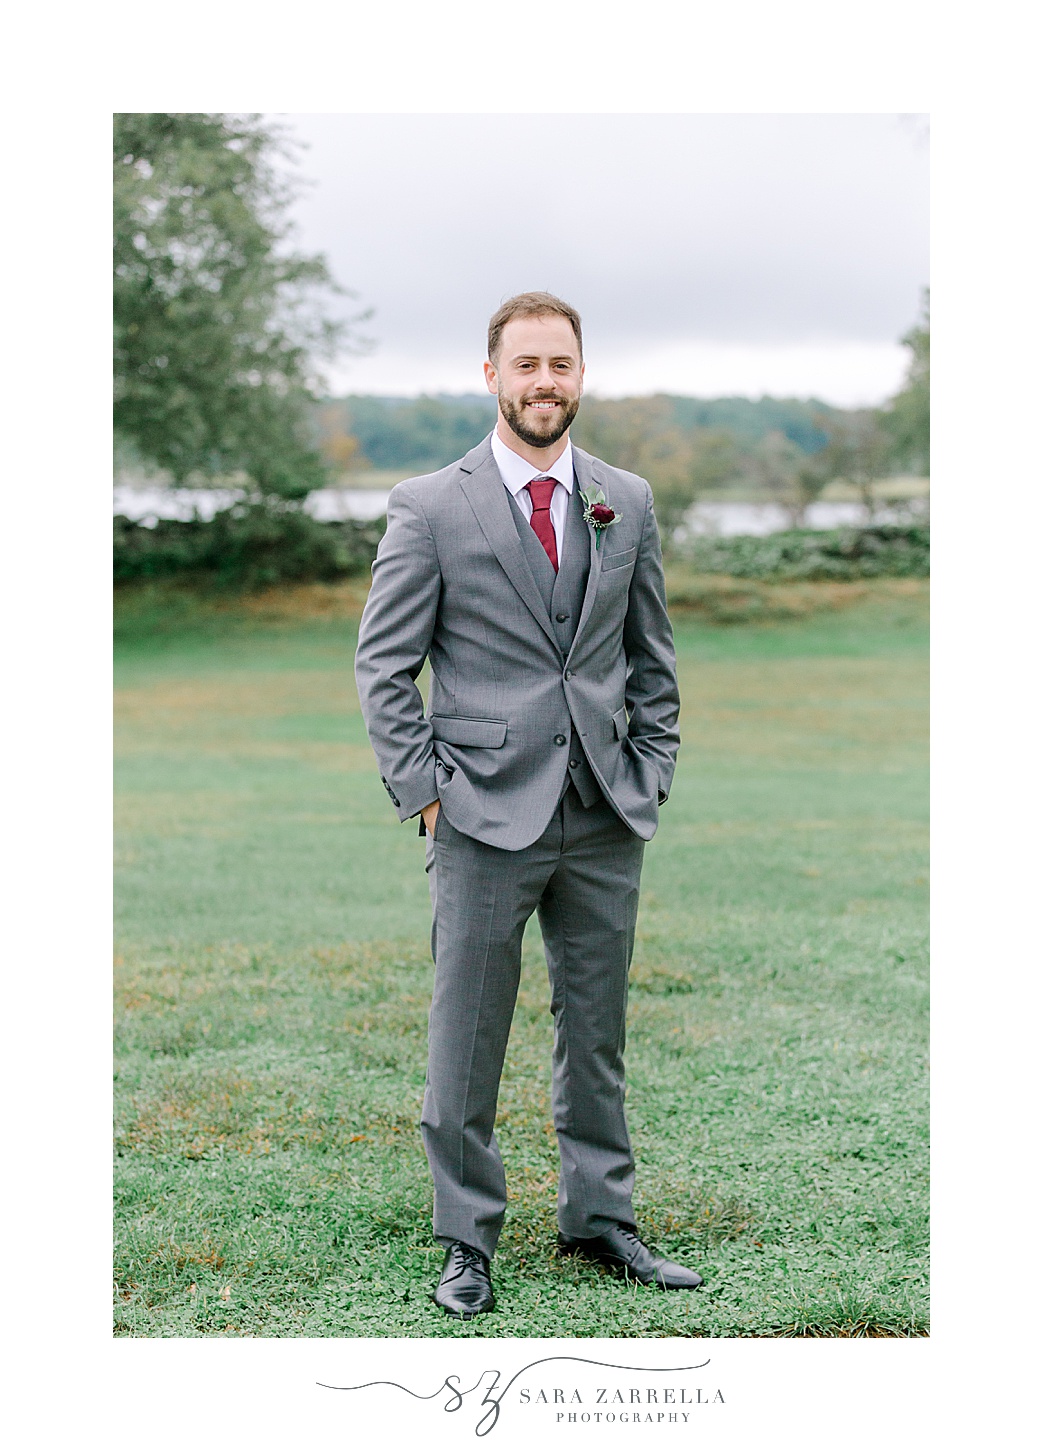 groom poses in grey suit with red tie and boutineere 